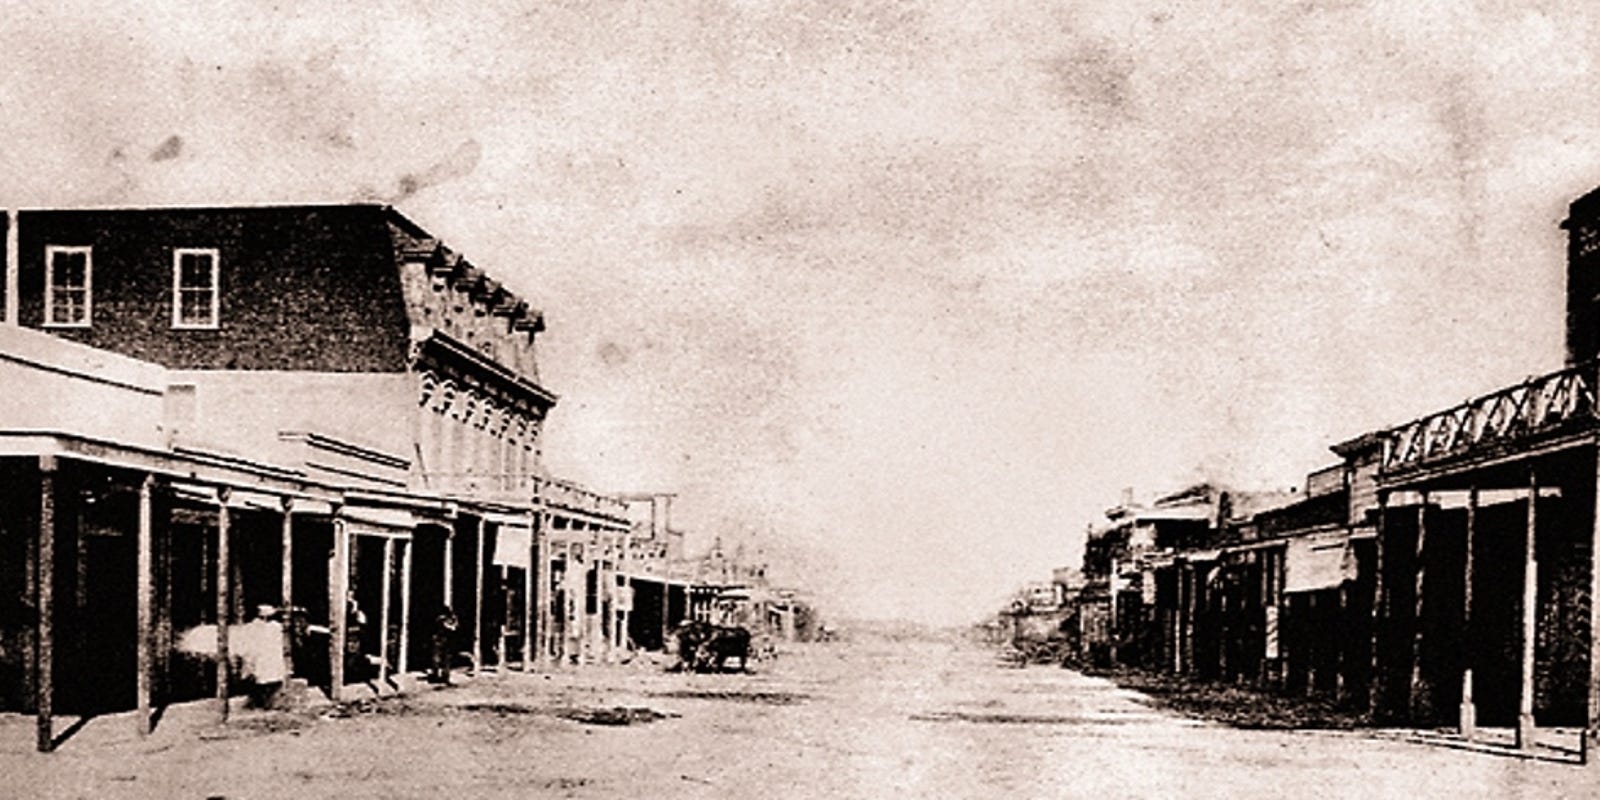 Today In History October 26 1881 Gunfight At O K Corral Took Place In Tombstone Arizona